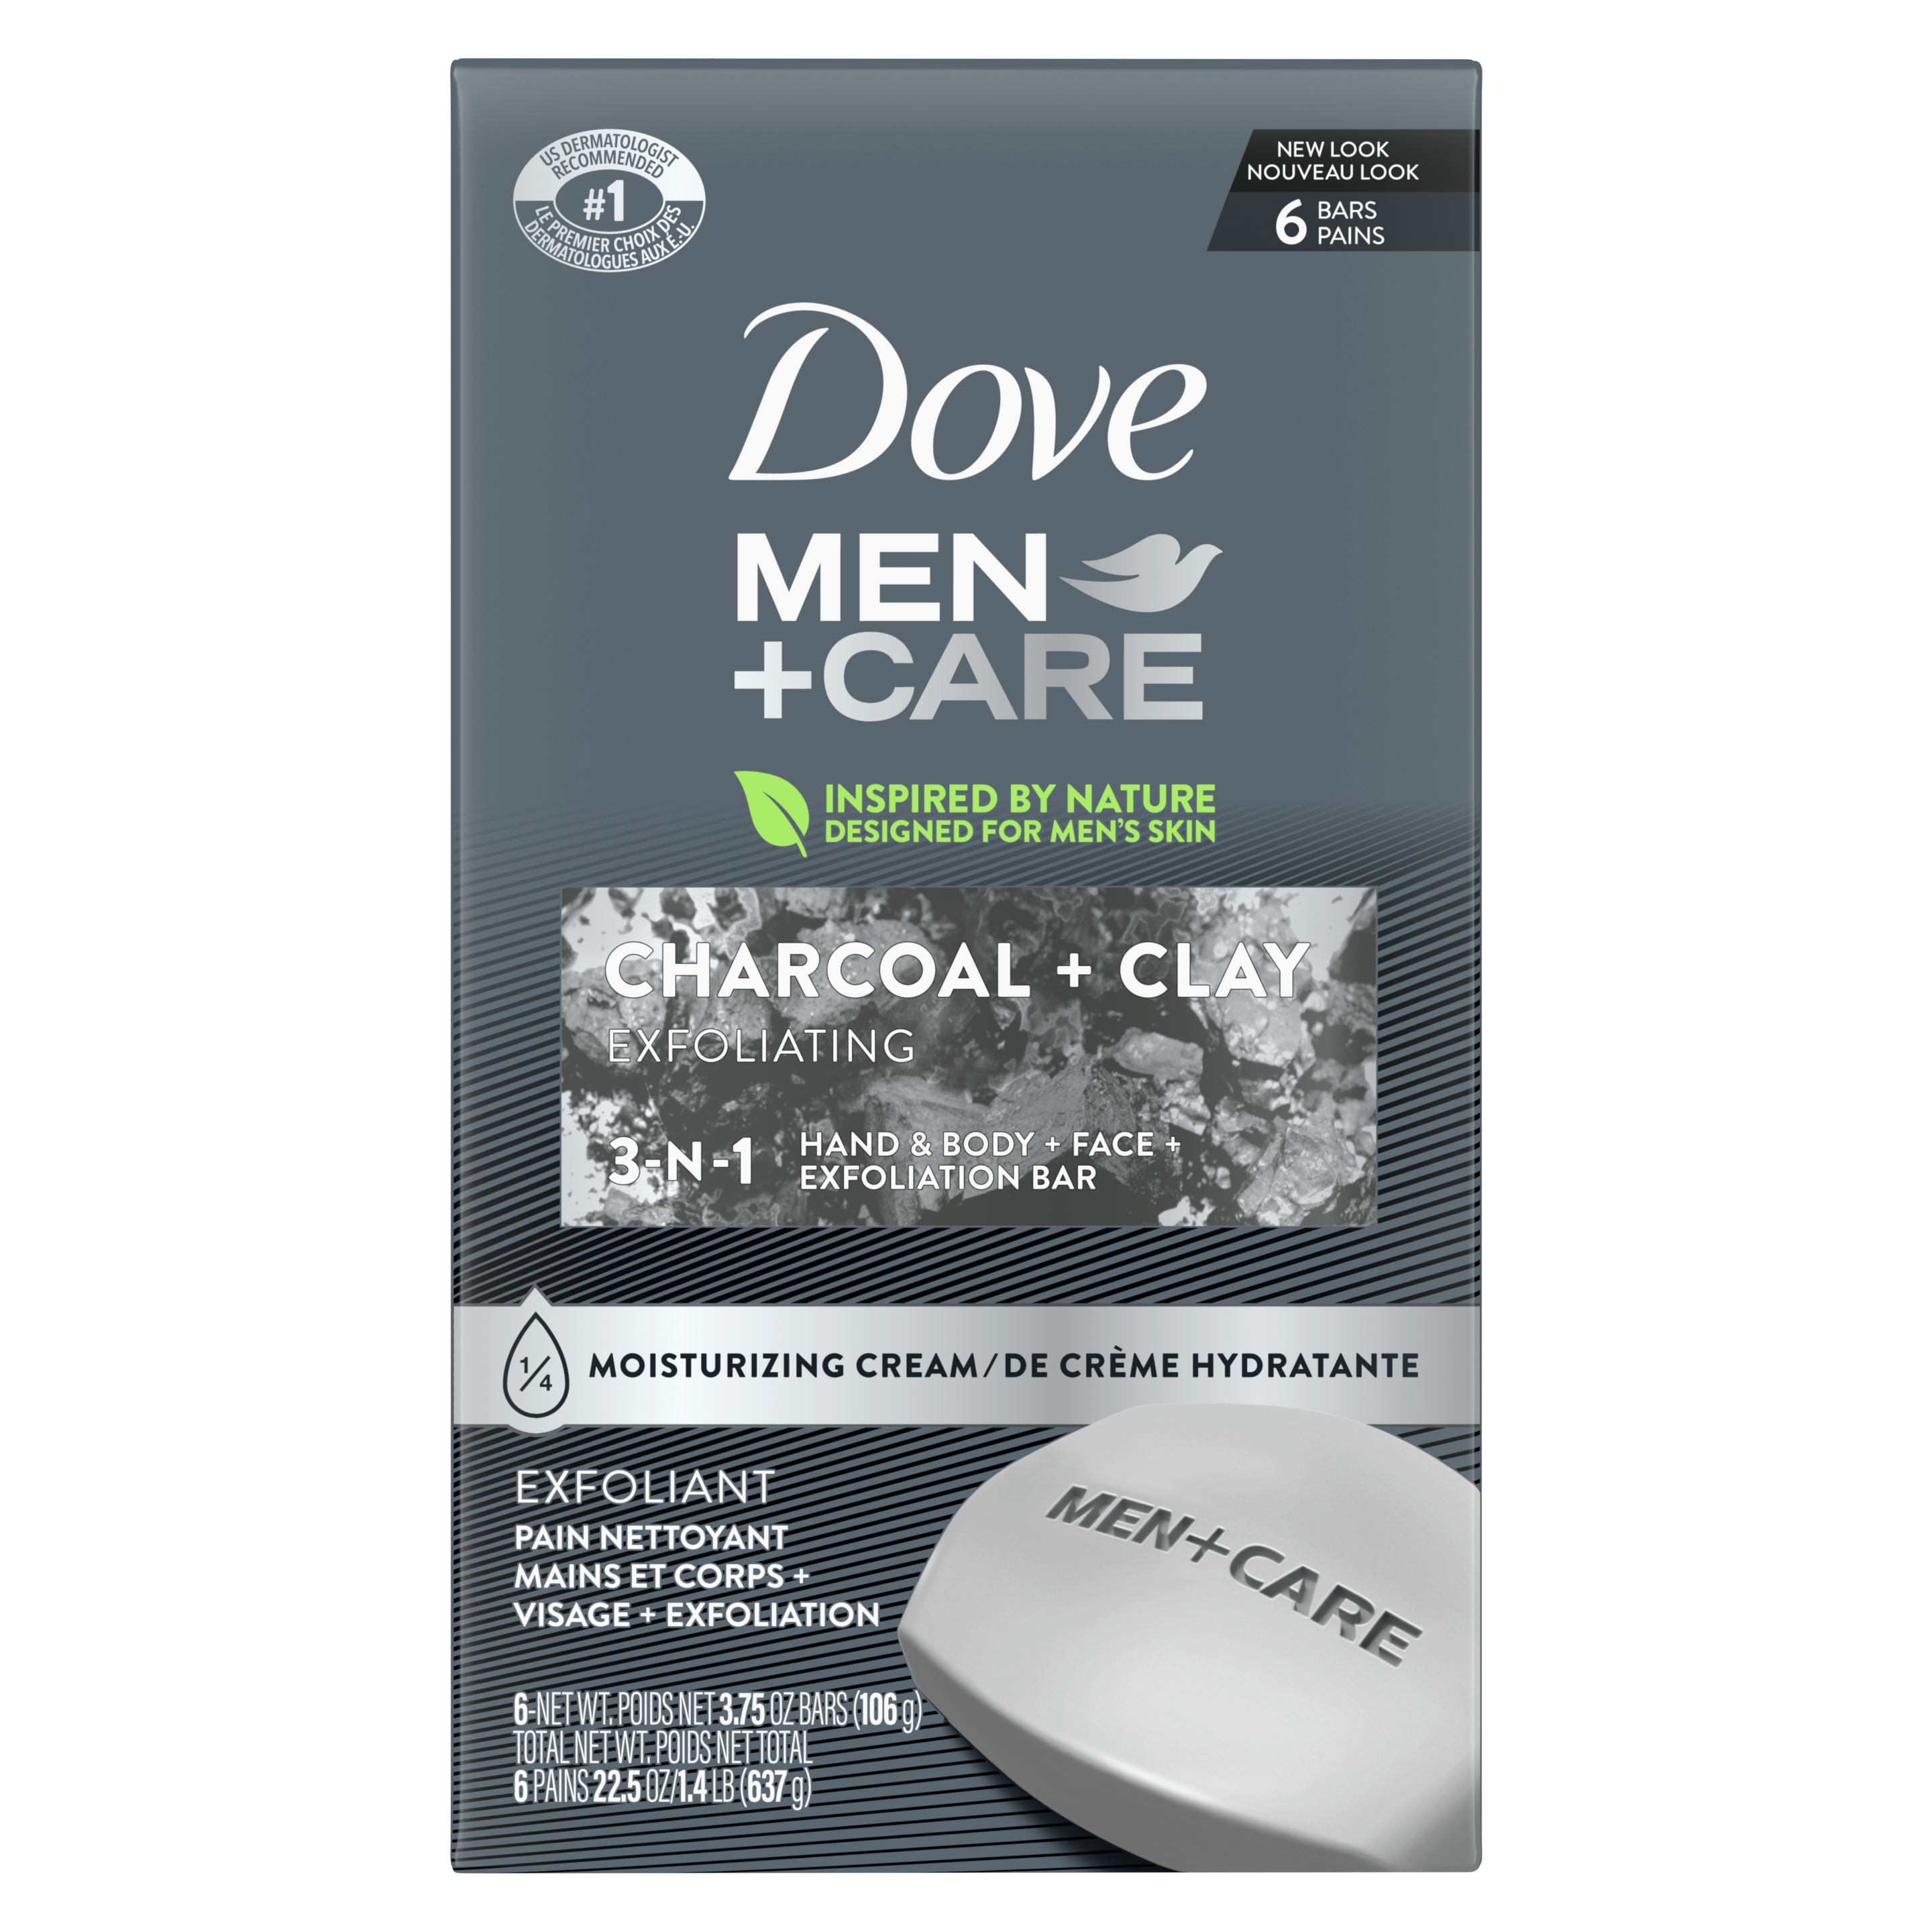 Dove Men+Care Body and Face Bar to Hydrate Skin Charcoal + Clay More Moisturizing Than Bar Soap 3.75 oz